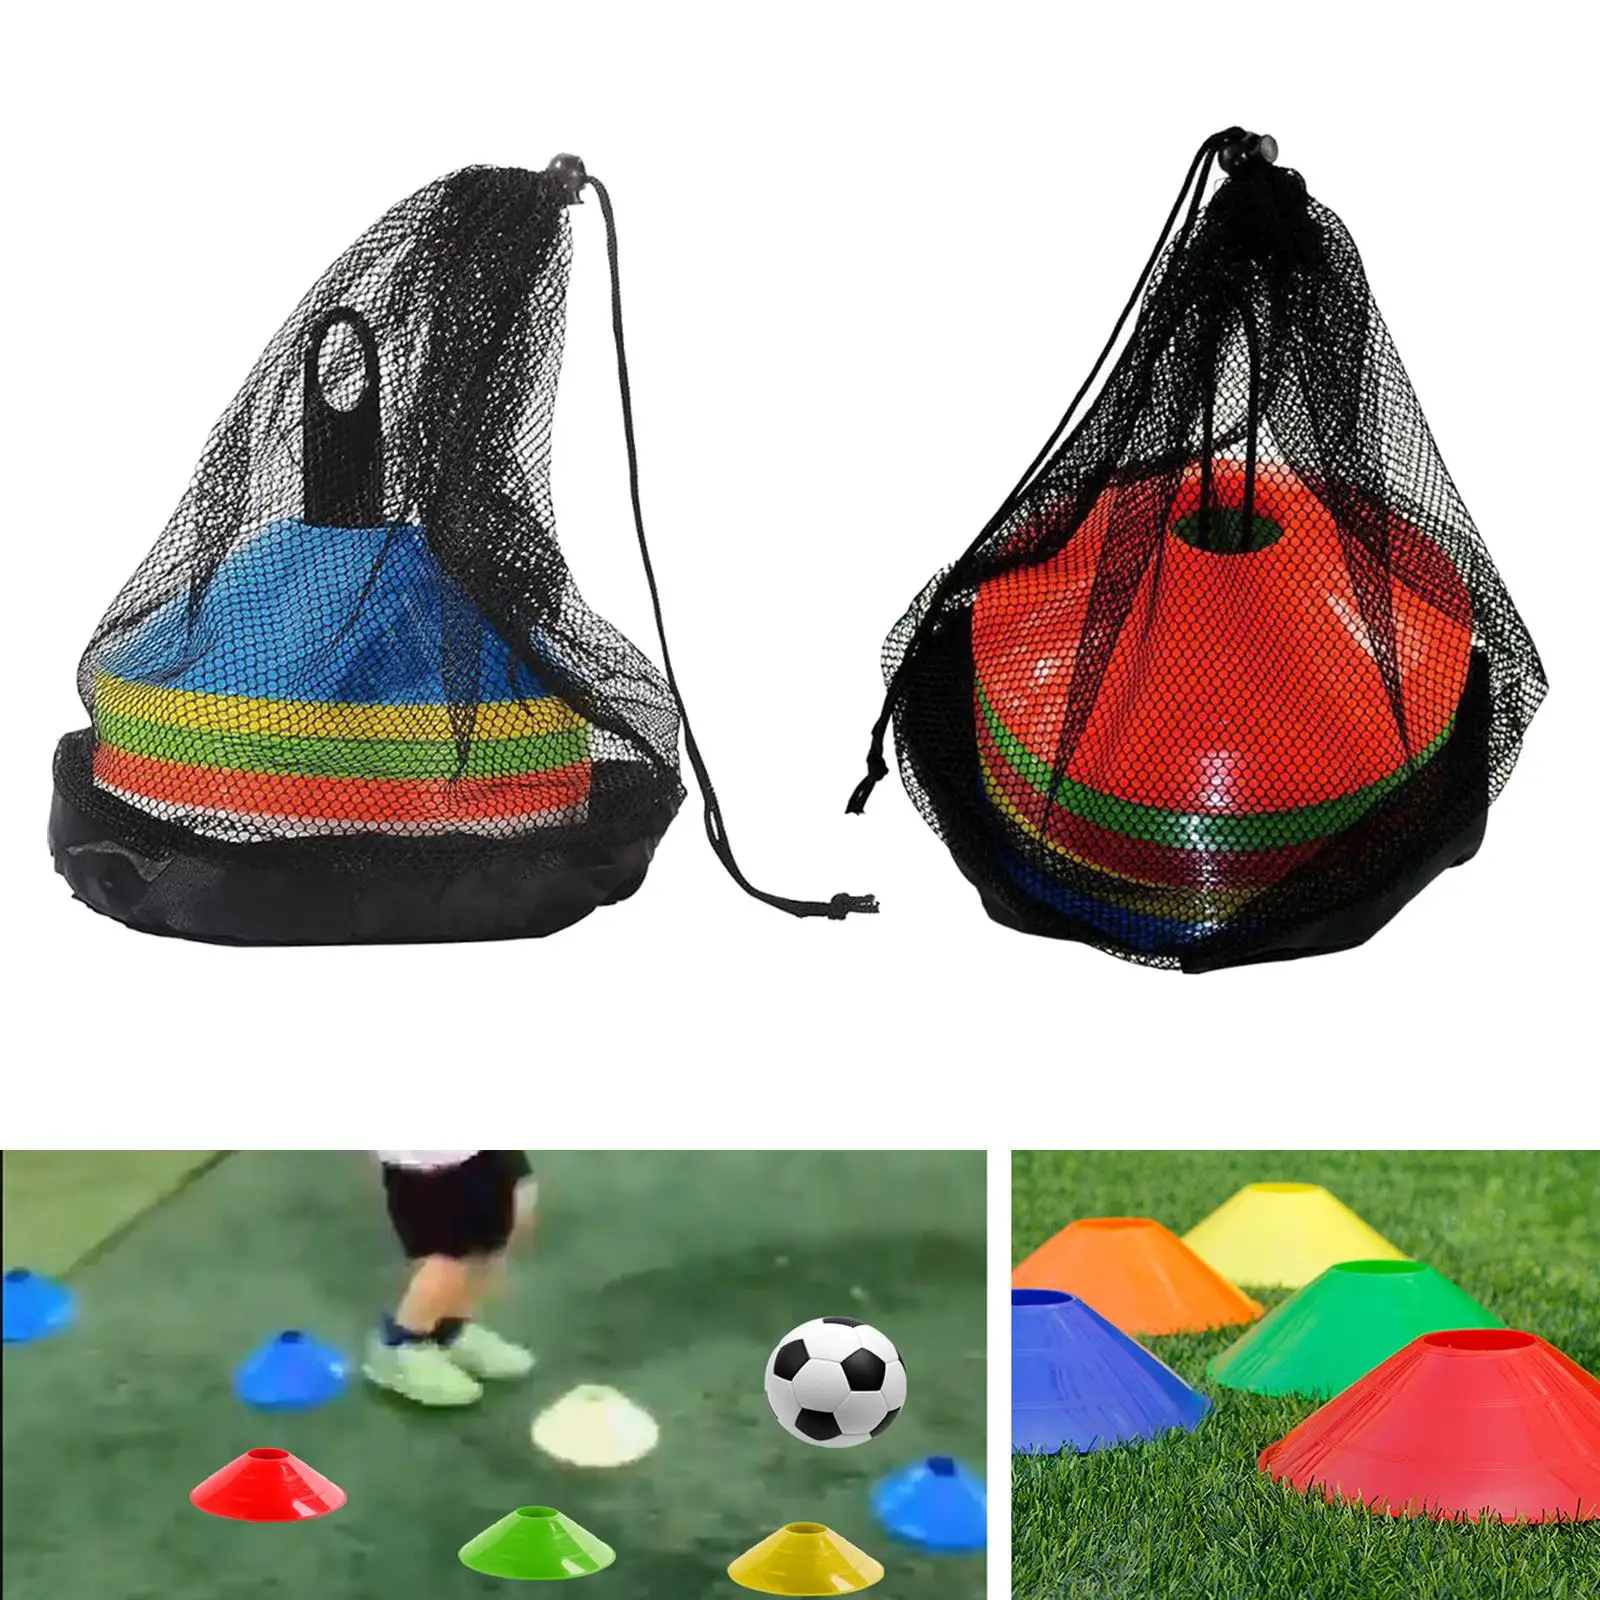 50x Training Cones Agility Soccer Cones for Improve Speed Agility Classroom